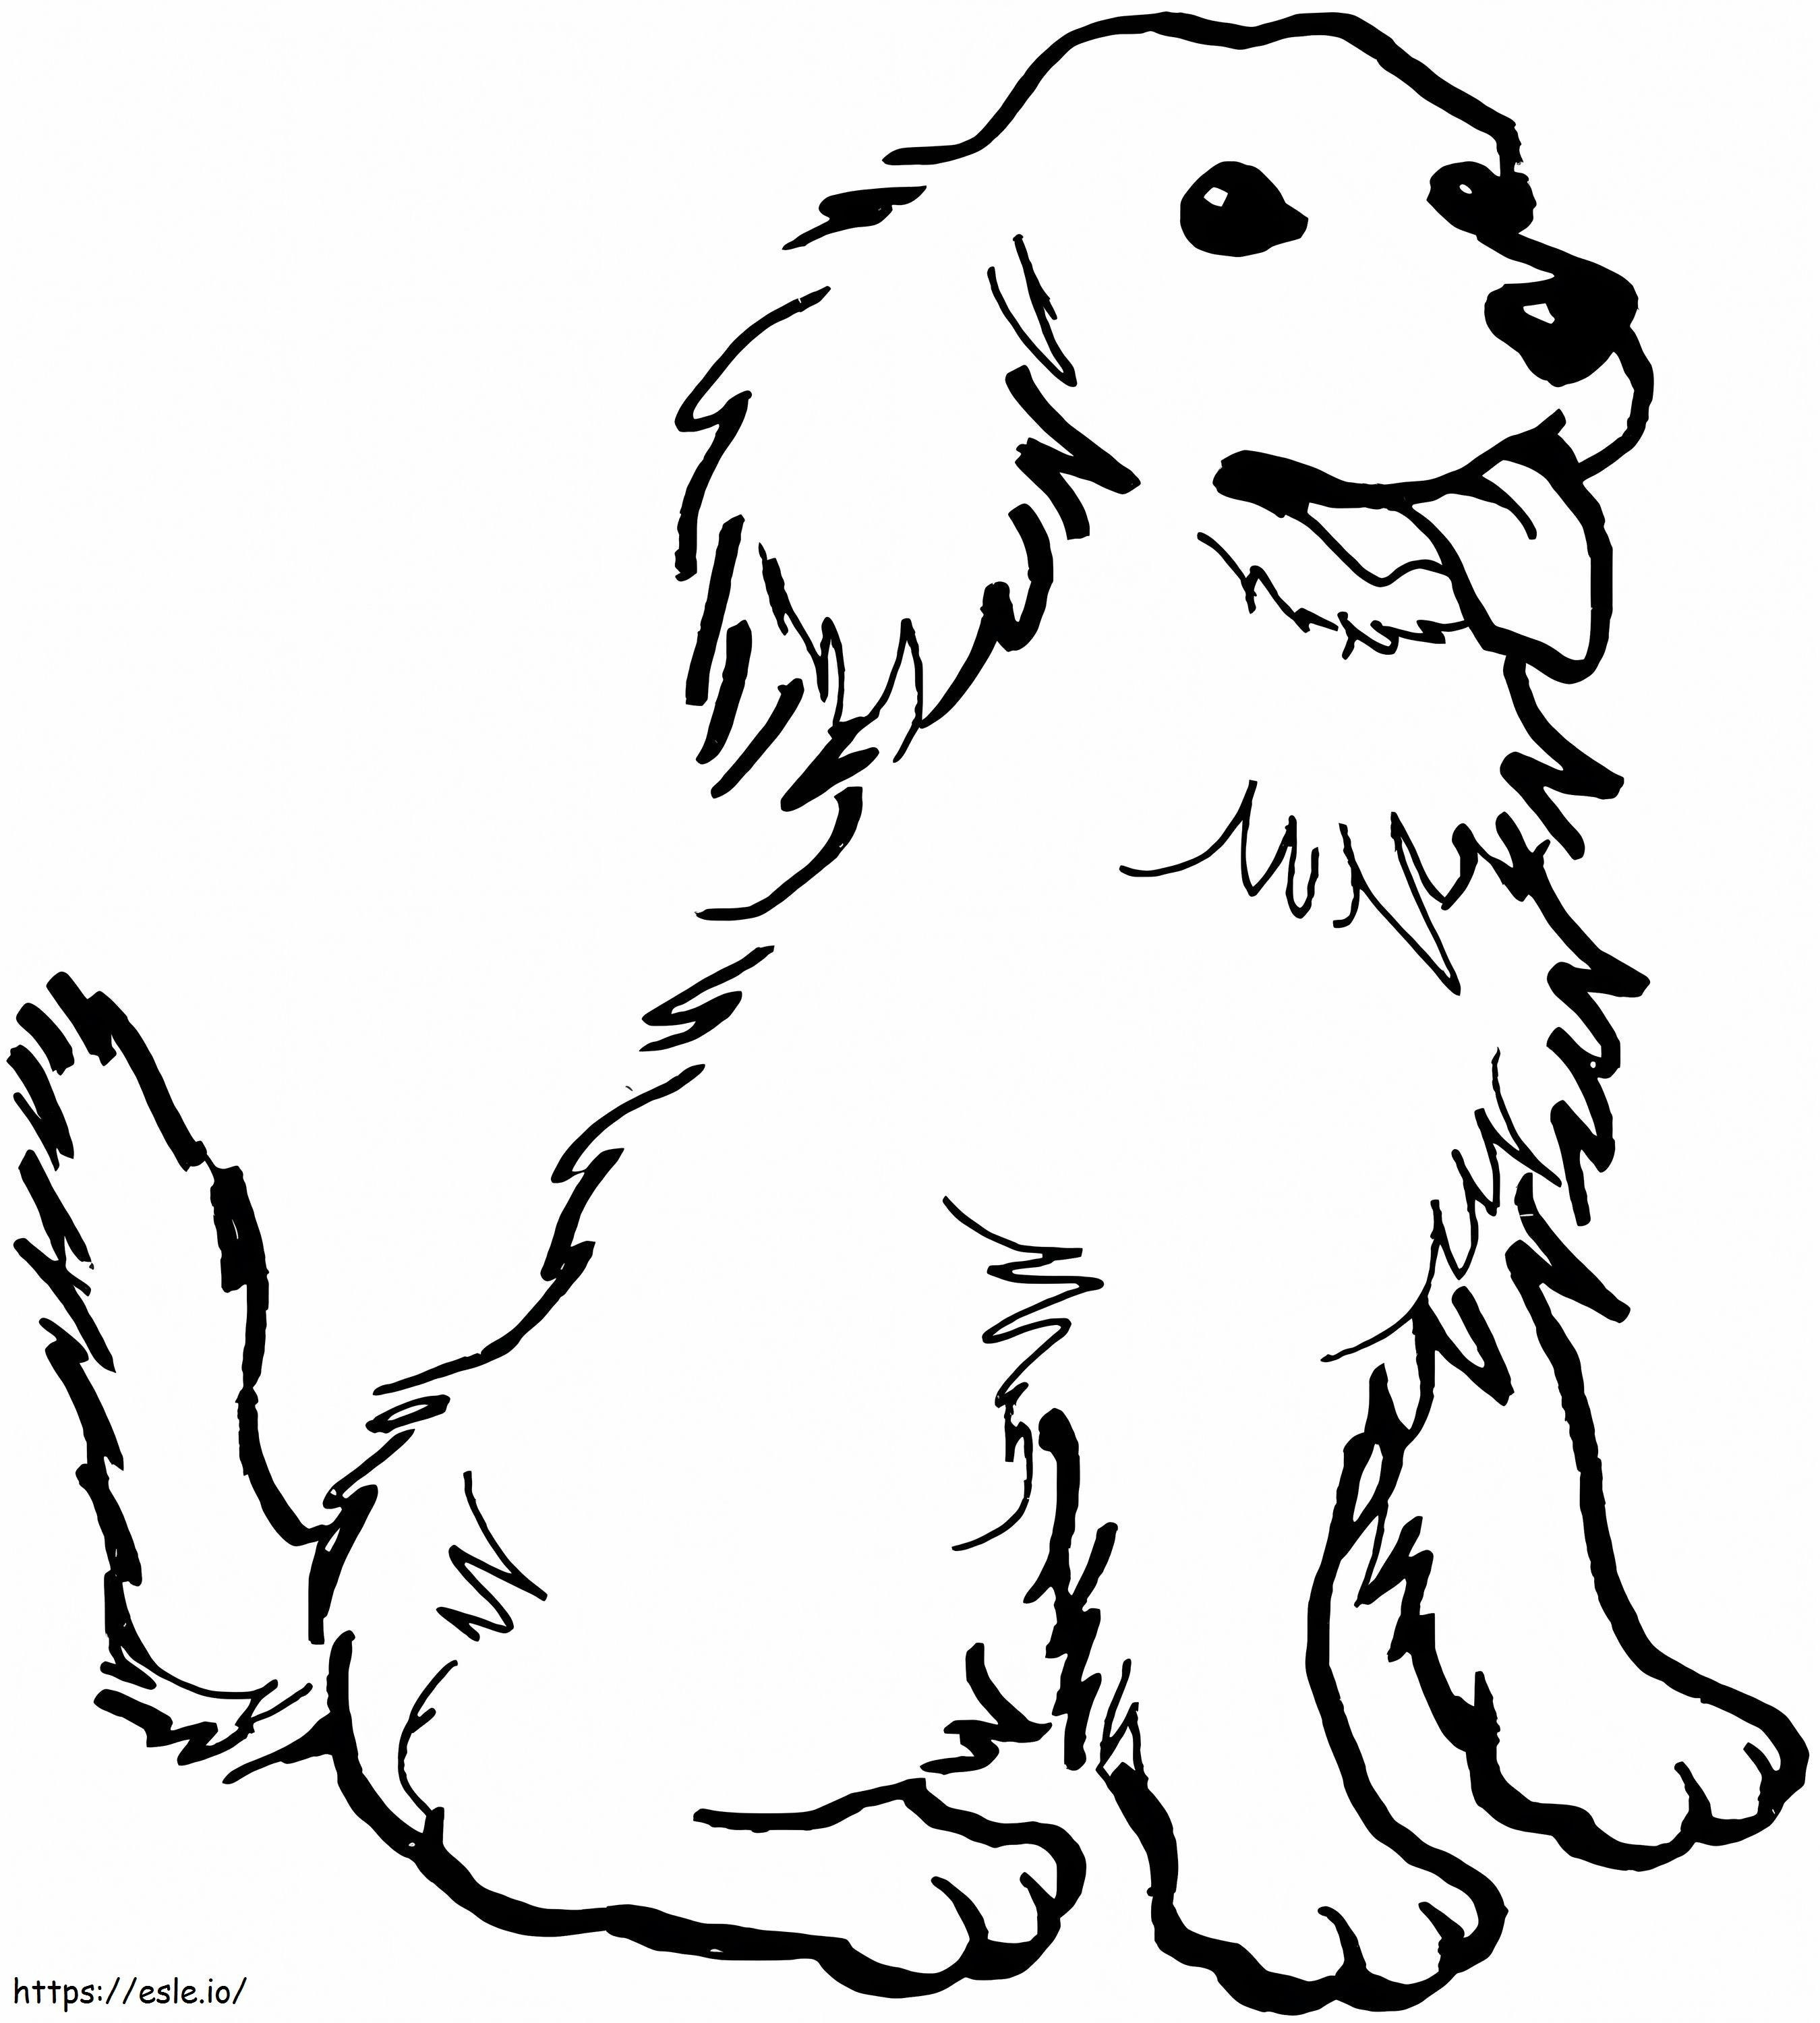 Sitting Dog coloring page